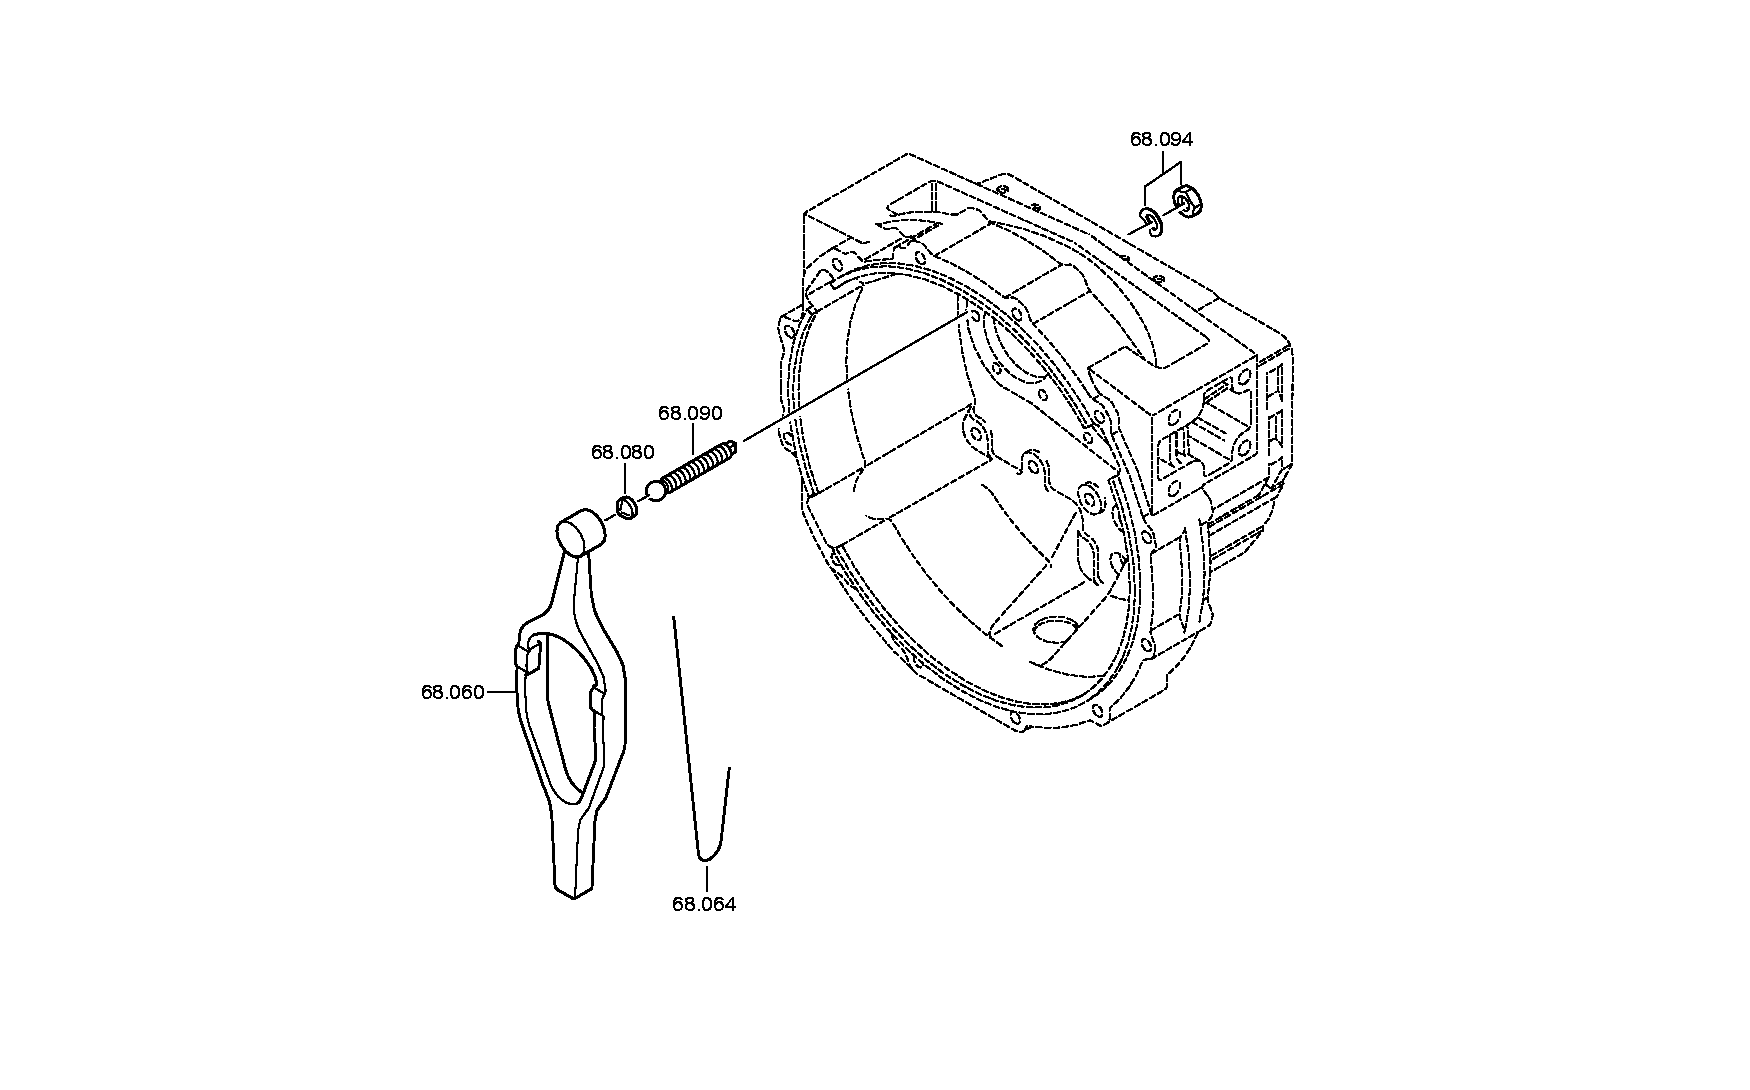 drawing for SKF VG3204 - CLUTCH CYLINDER (figure 4)